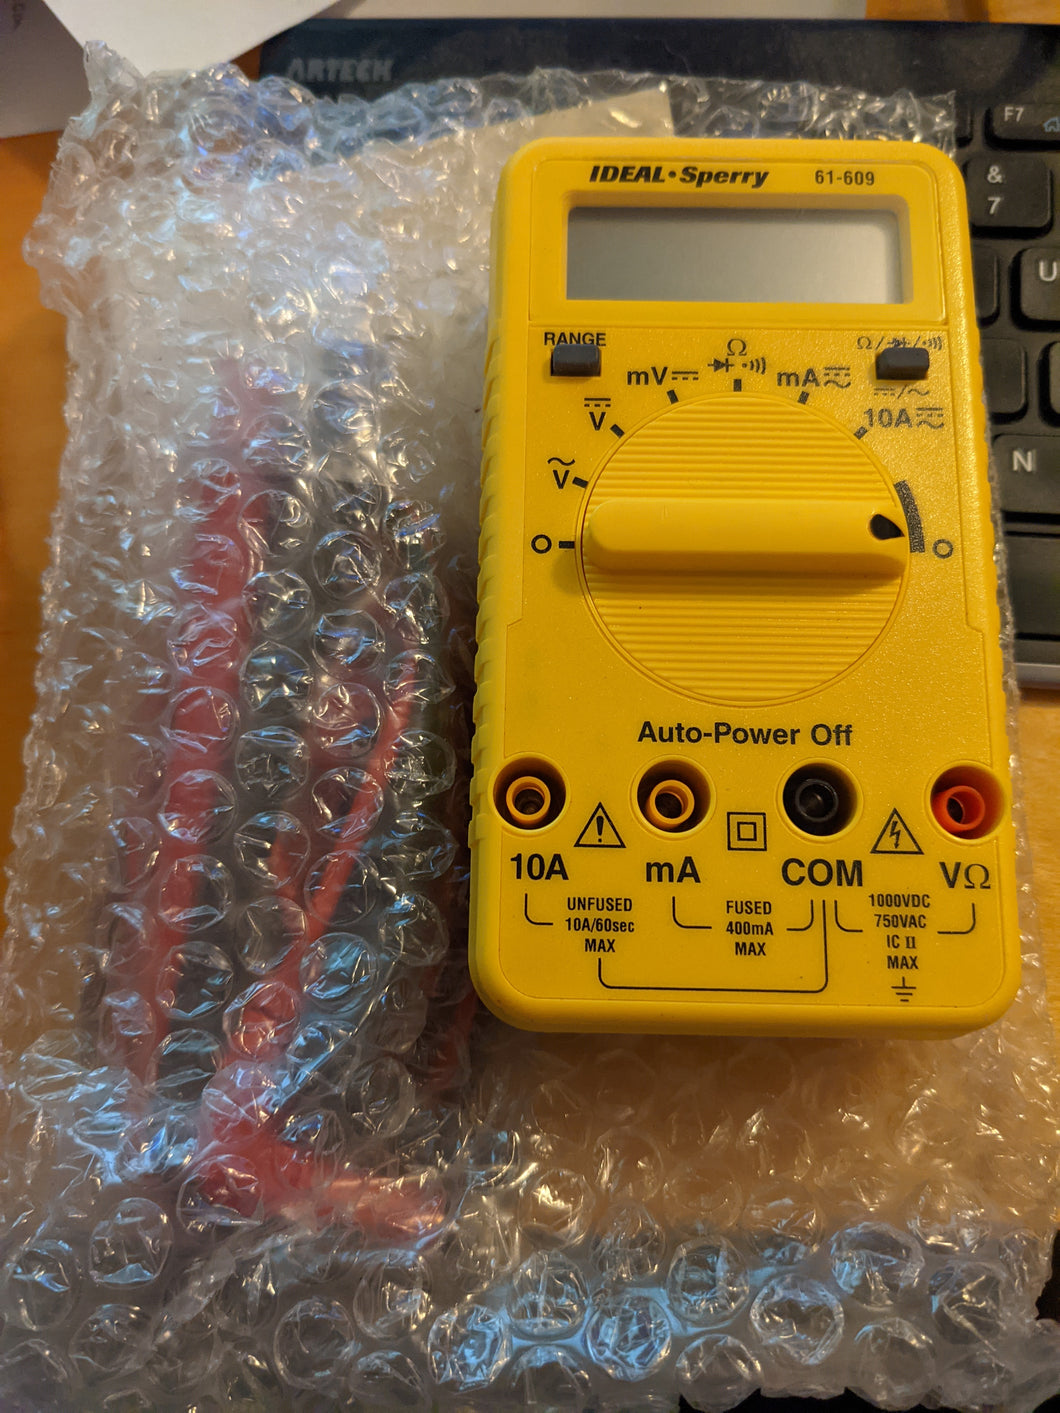 Sperry Digital multimeter with probes